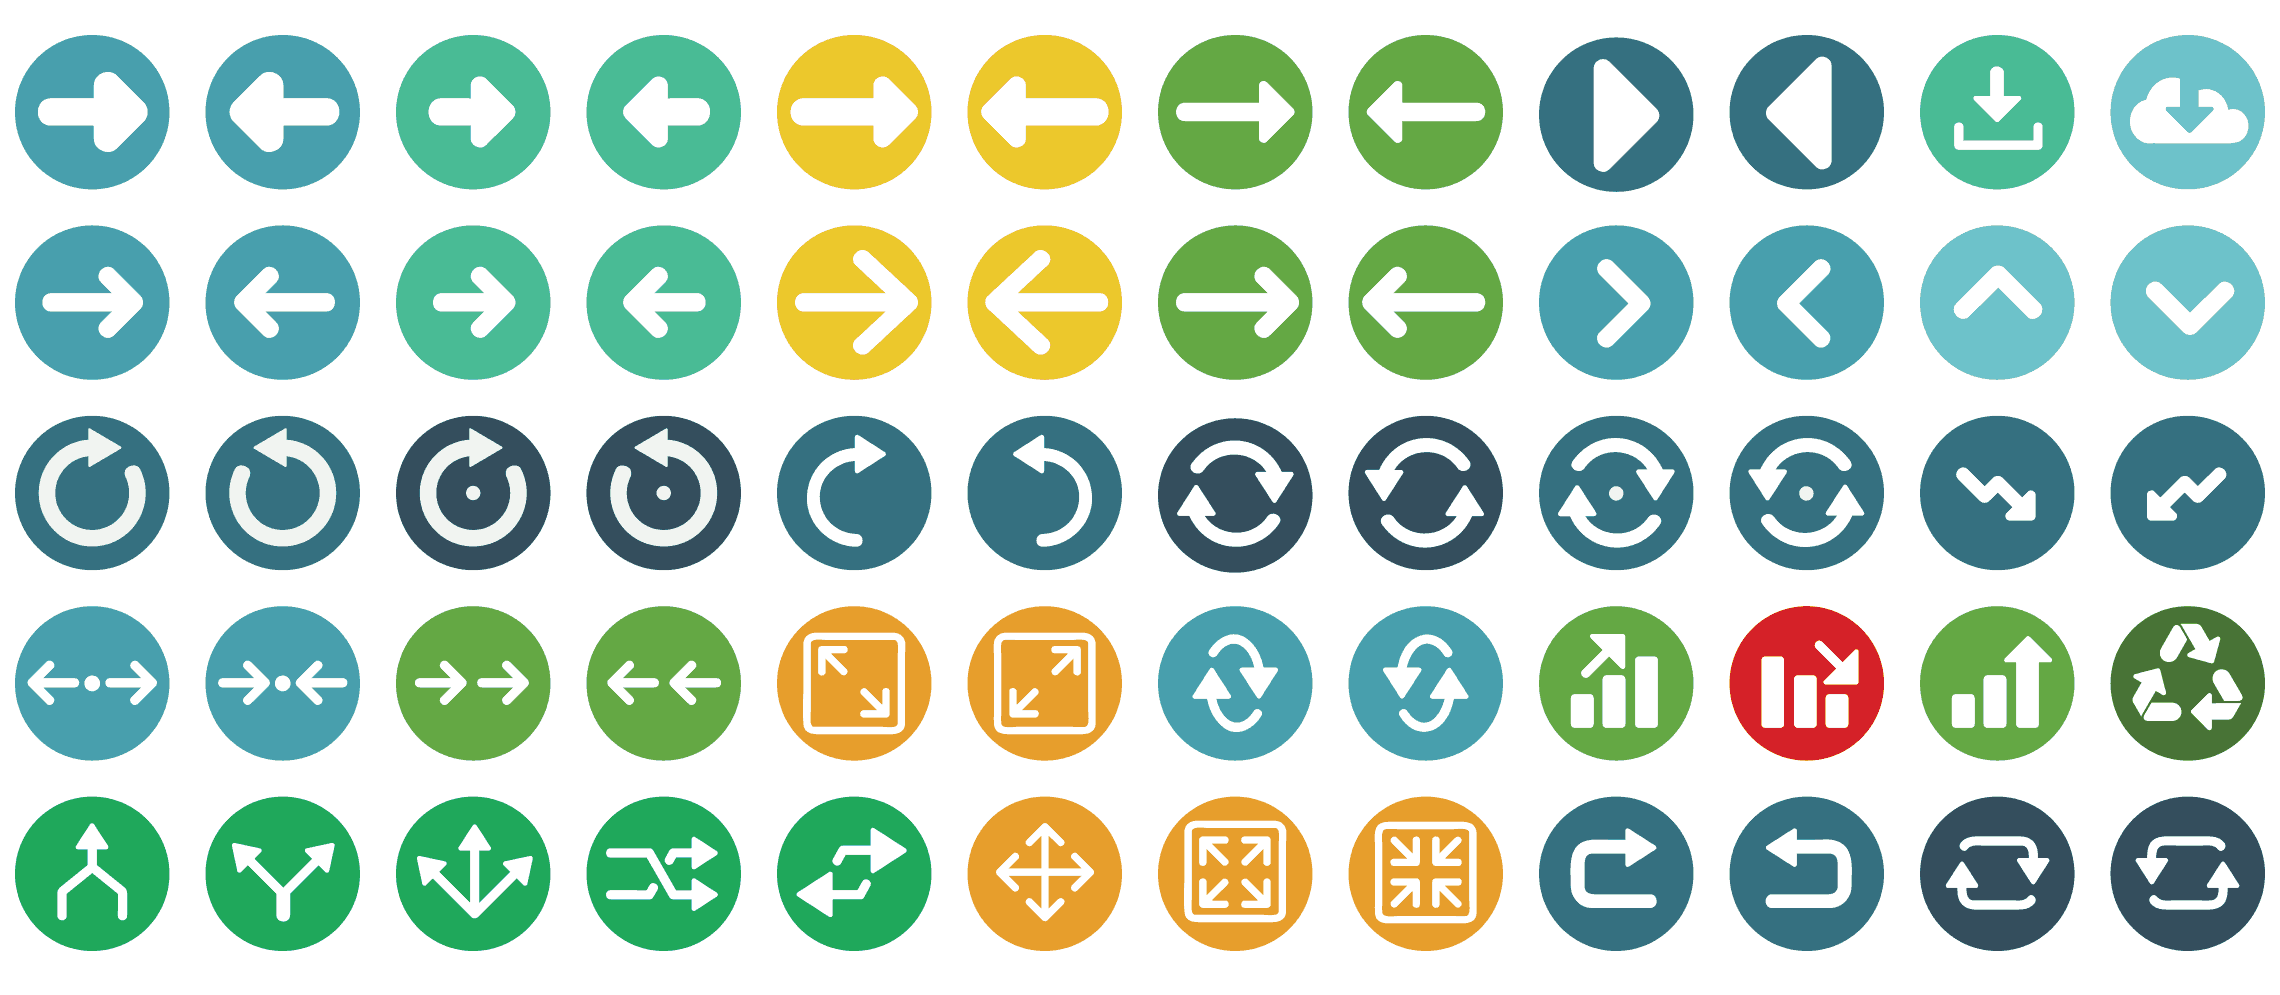 arrows-flat-icons-vol-1-preview